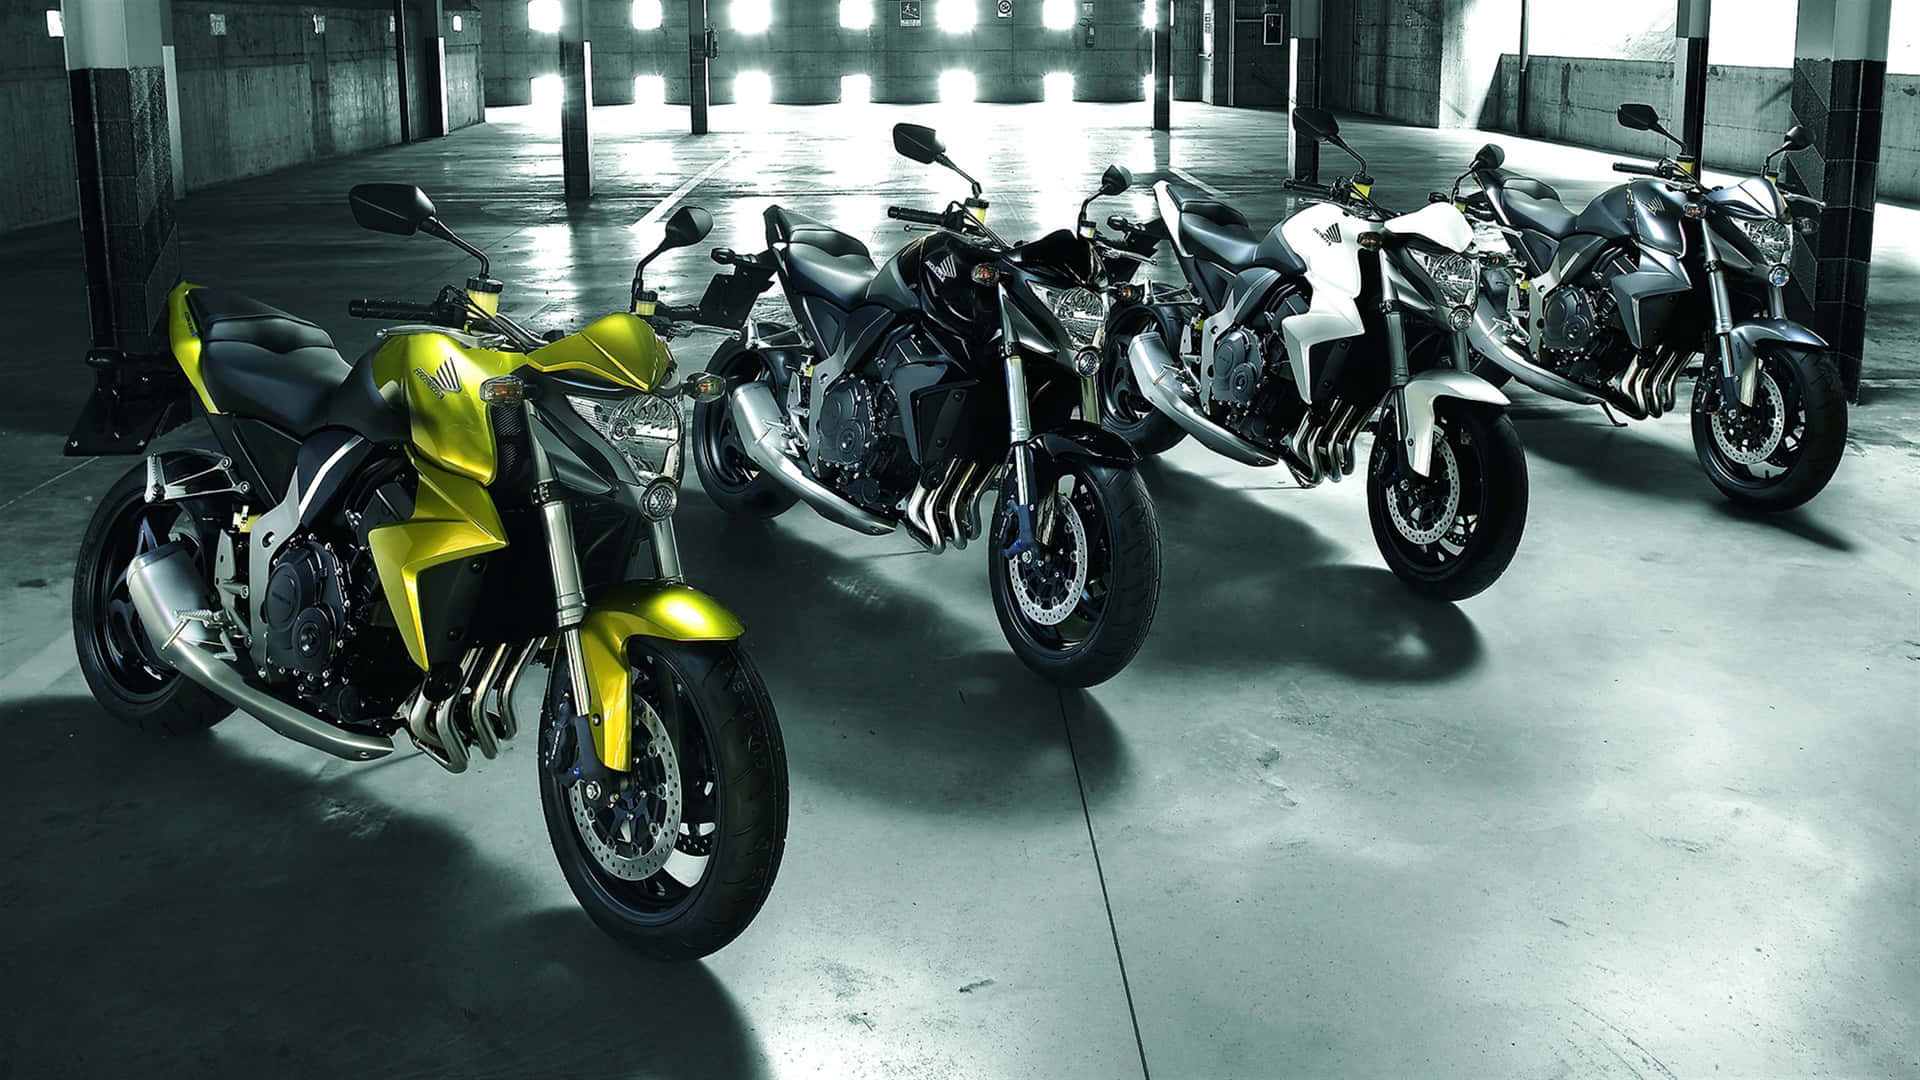 A Group Of Motorcycles Parked In A Warehouse